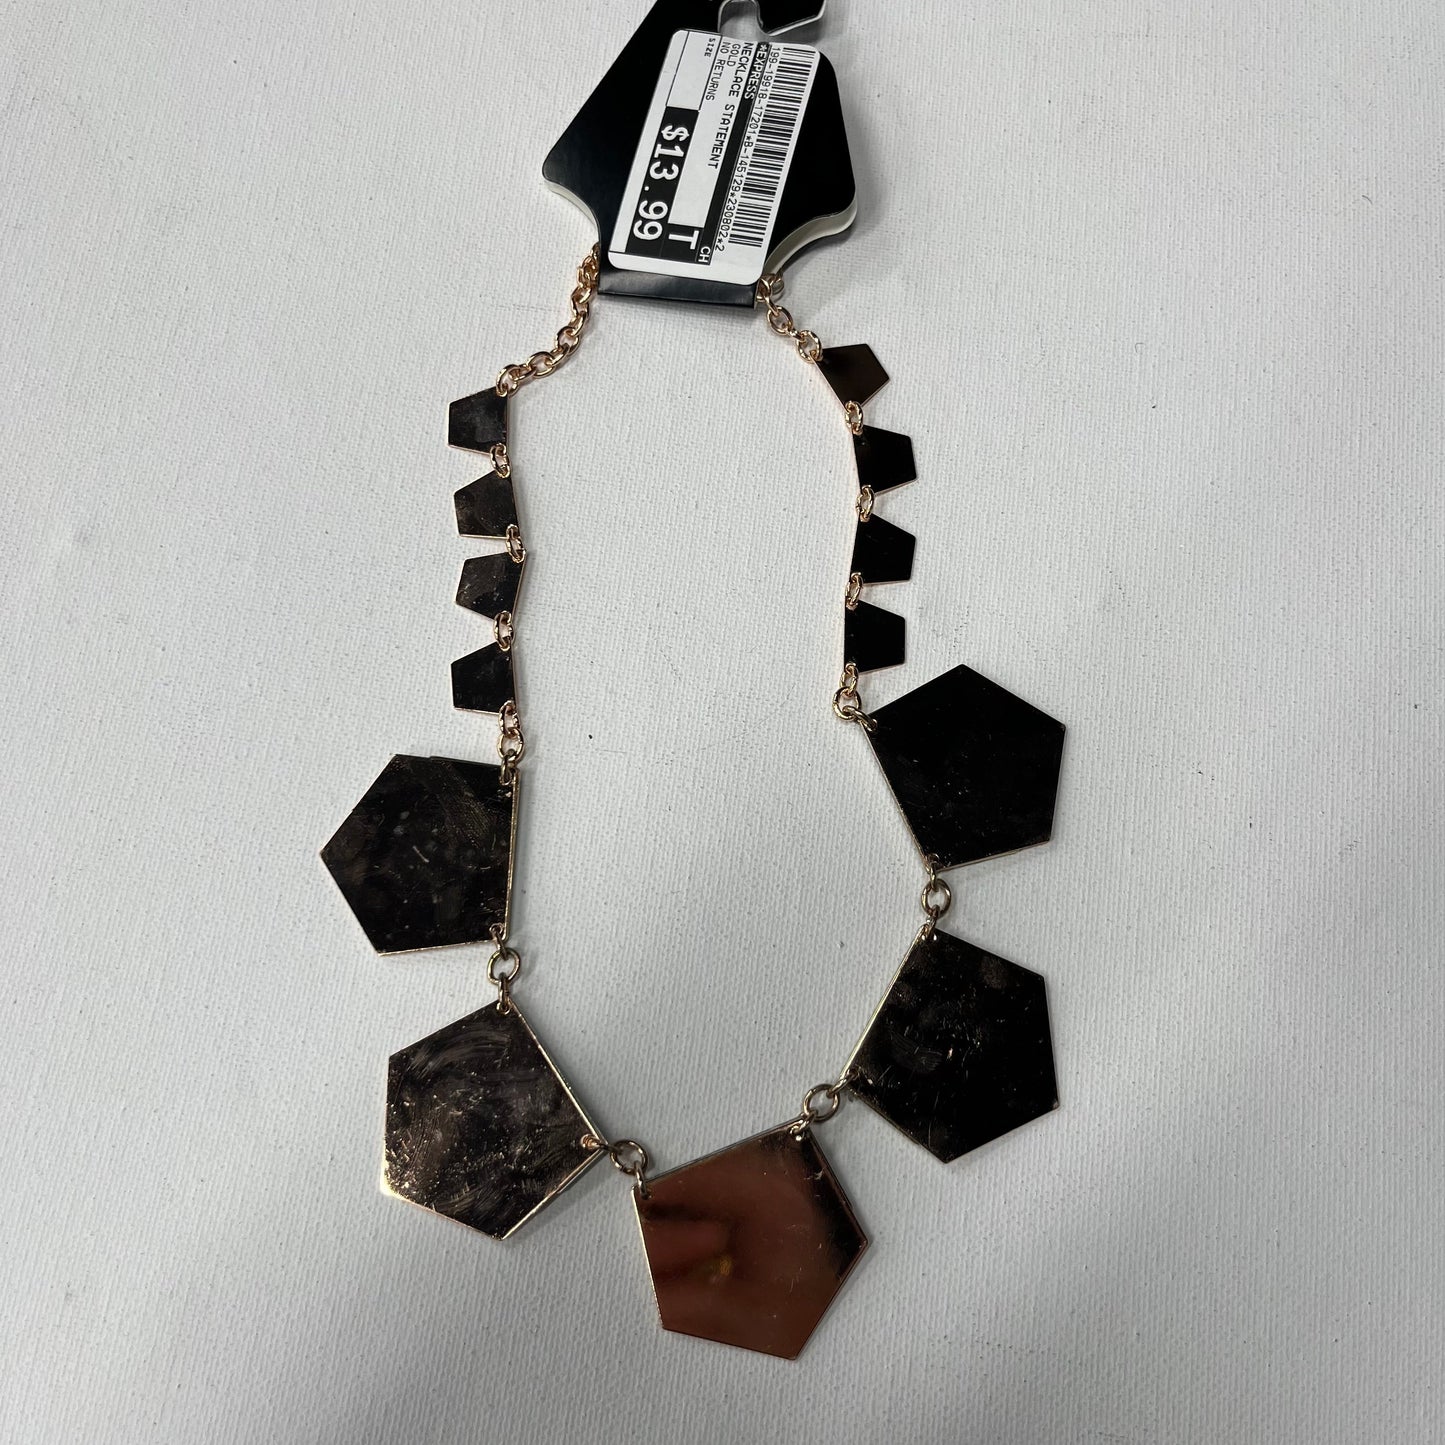 Necklace Statement By Express